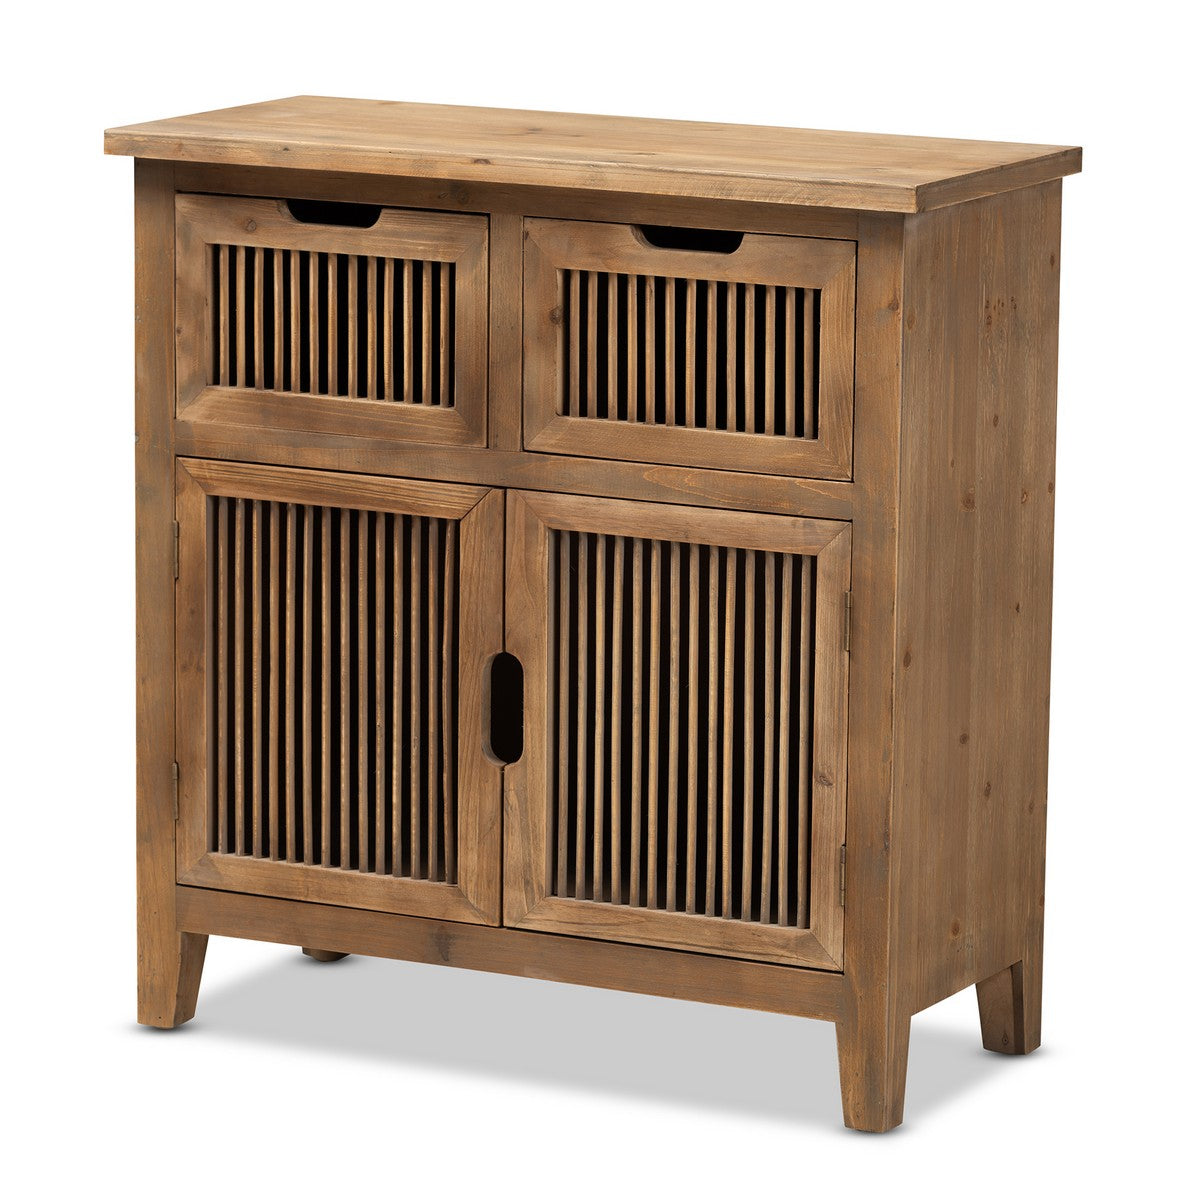 Baxton Studio Clement Rustic Transitional Medium Oak Finished 2-Door and 2-Drawer Wood Spindle Accent Storage Cabinet Baxton Studio-Multipurpose Shelving and Cabinets-Minimal And Modern - 1